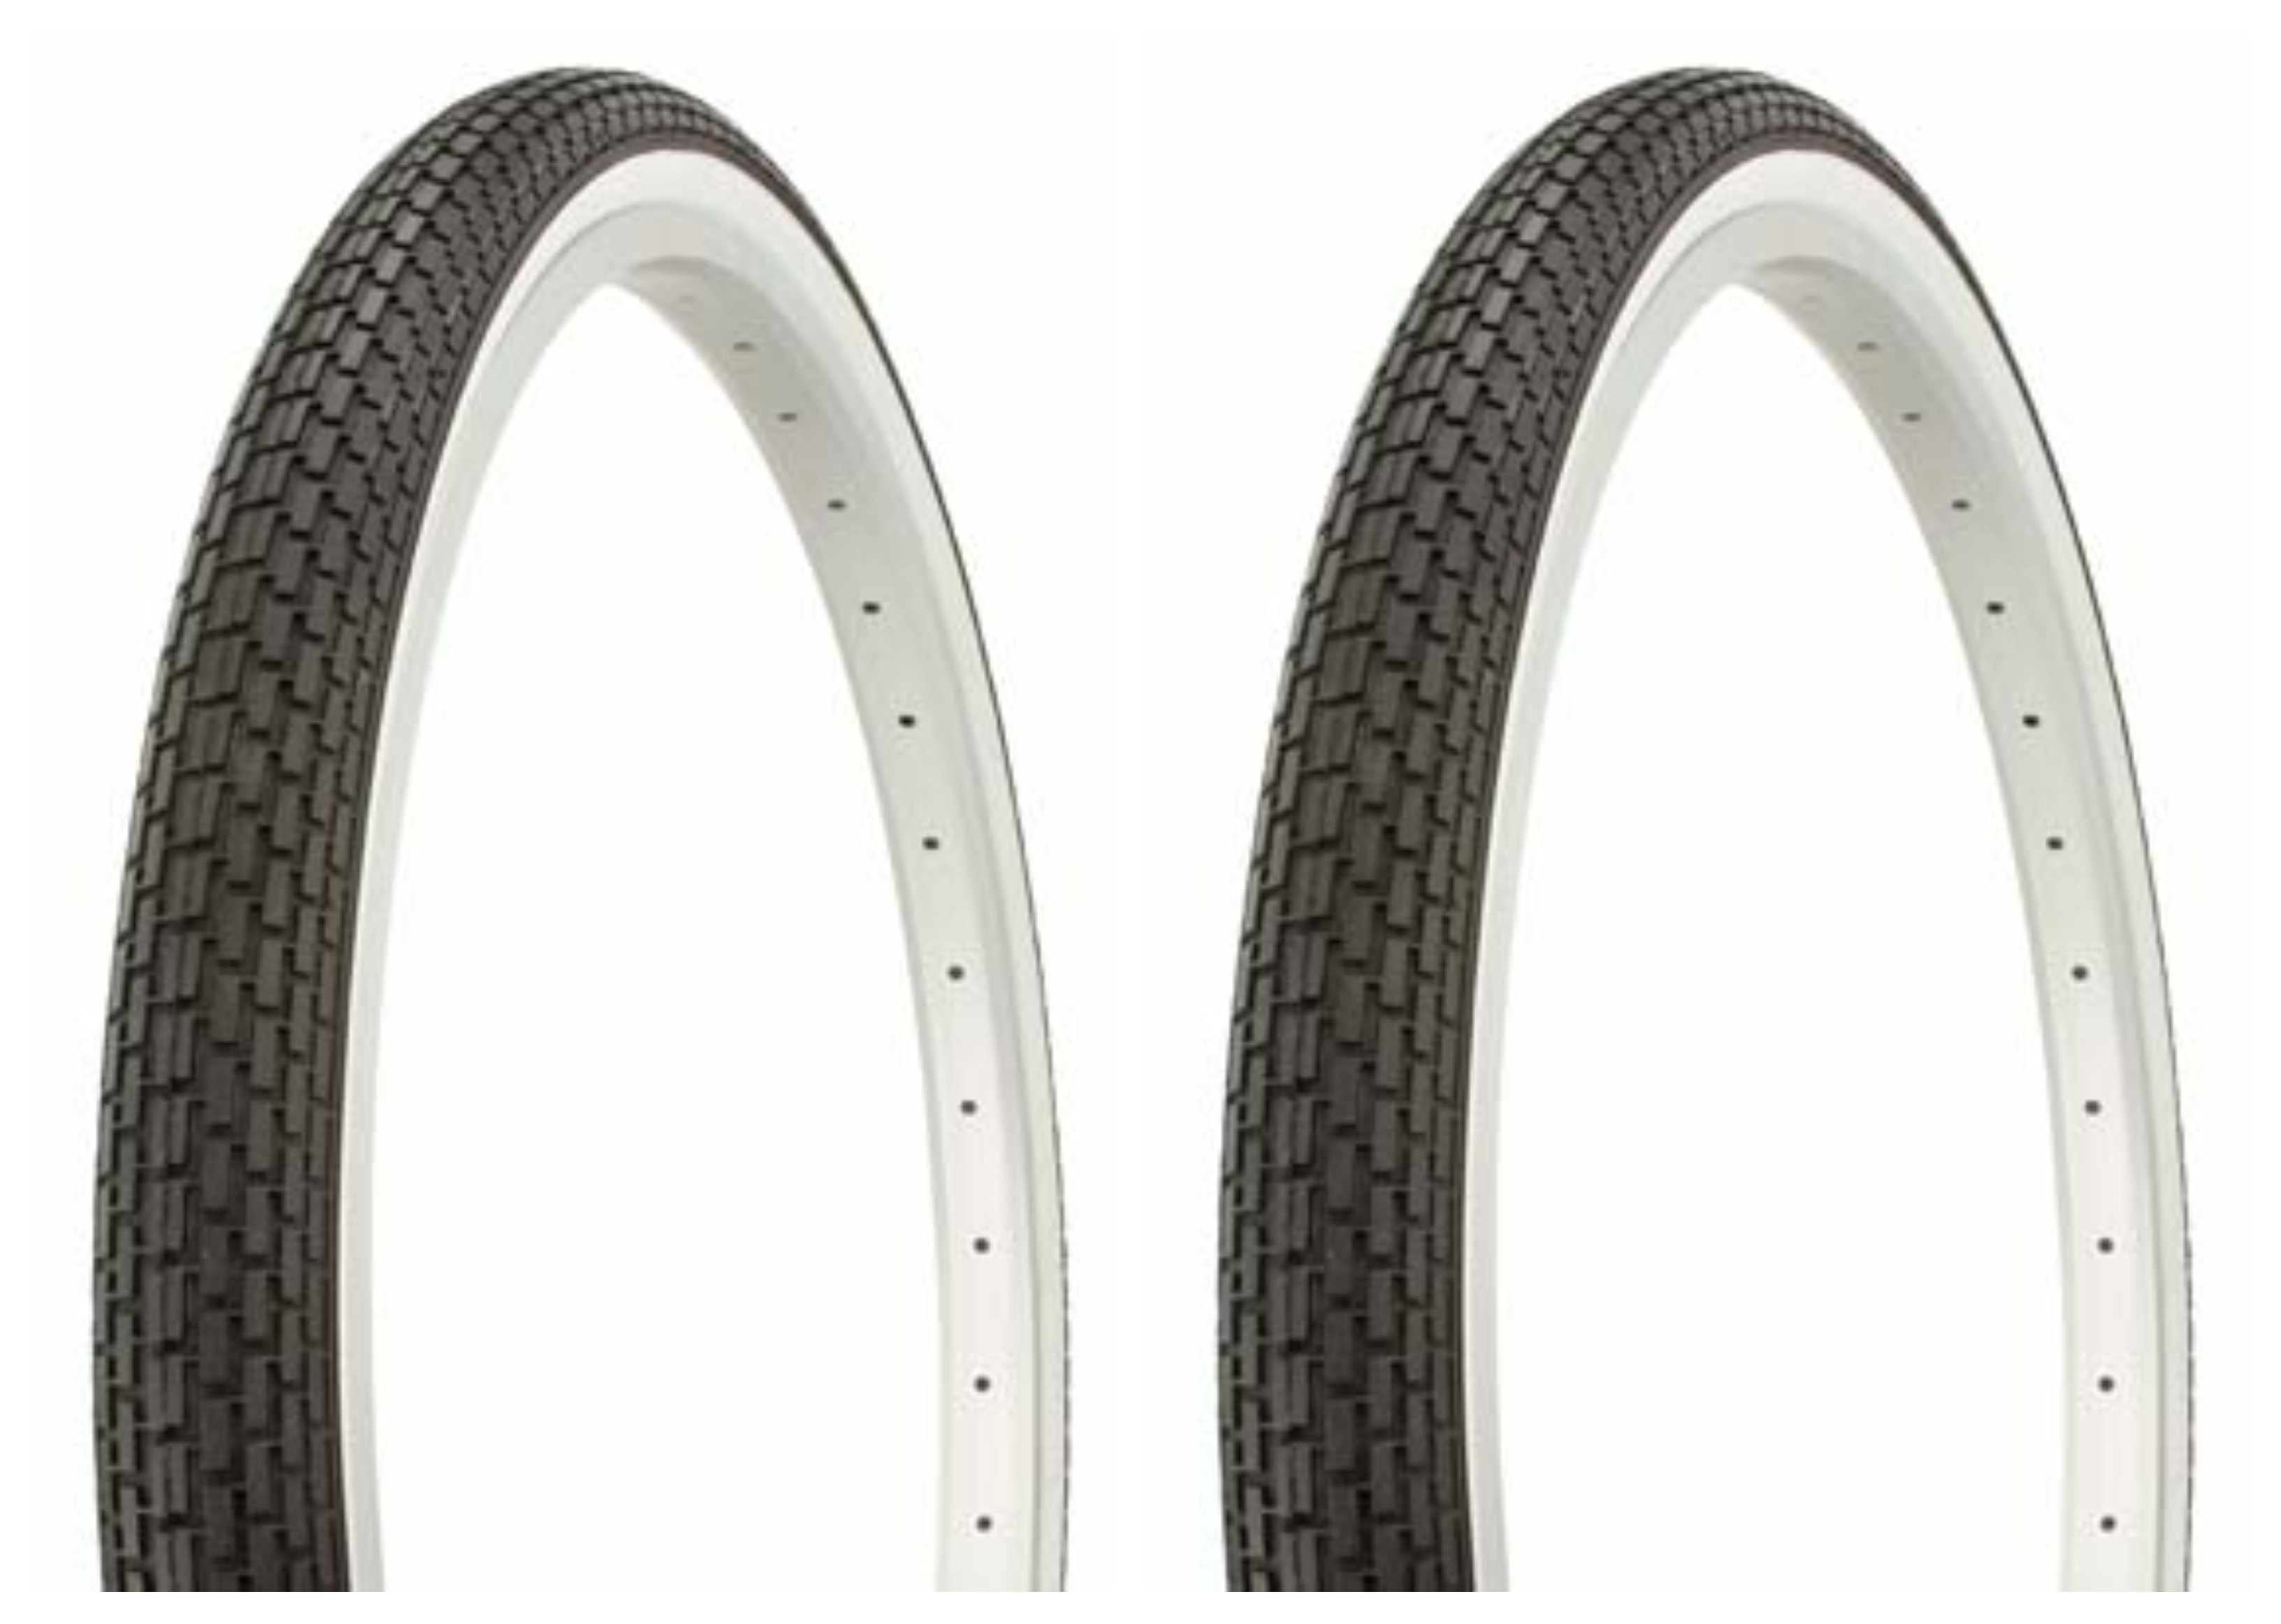 Tire set. 2 Tires. Two Tires Duro 26" x 1.75" Black/White Side Wall HF-120A. Bicycle Tires, bike Tires, beach cruiser bike Tires, cruiser bike Tires - image 1 of 1